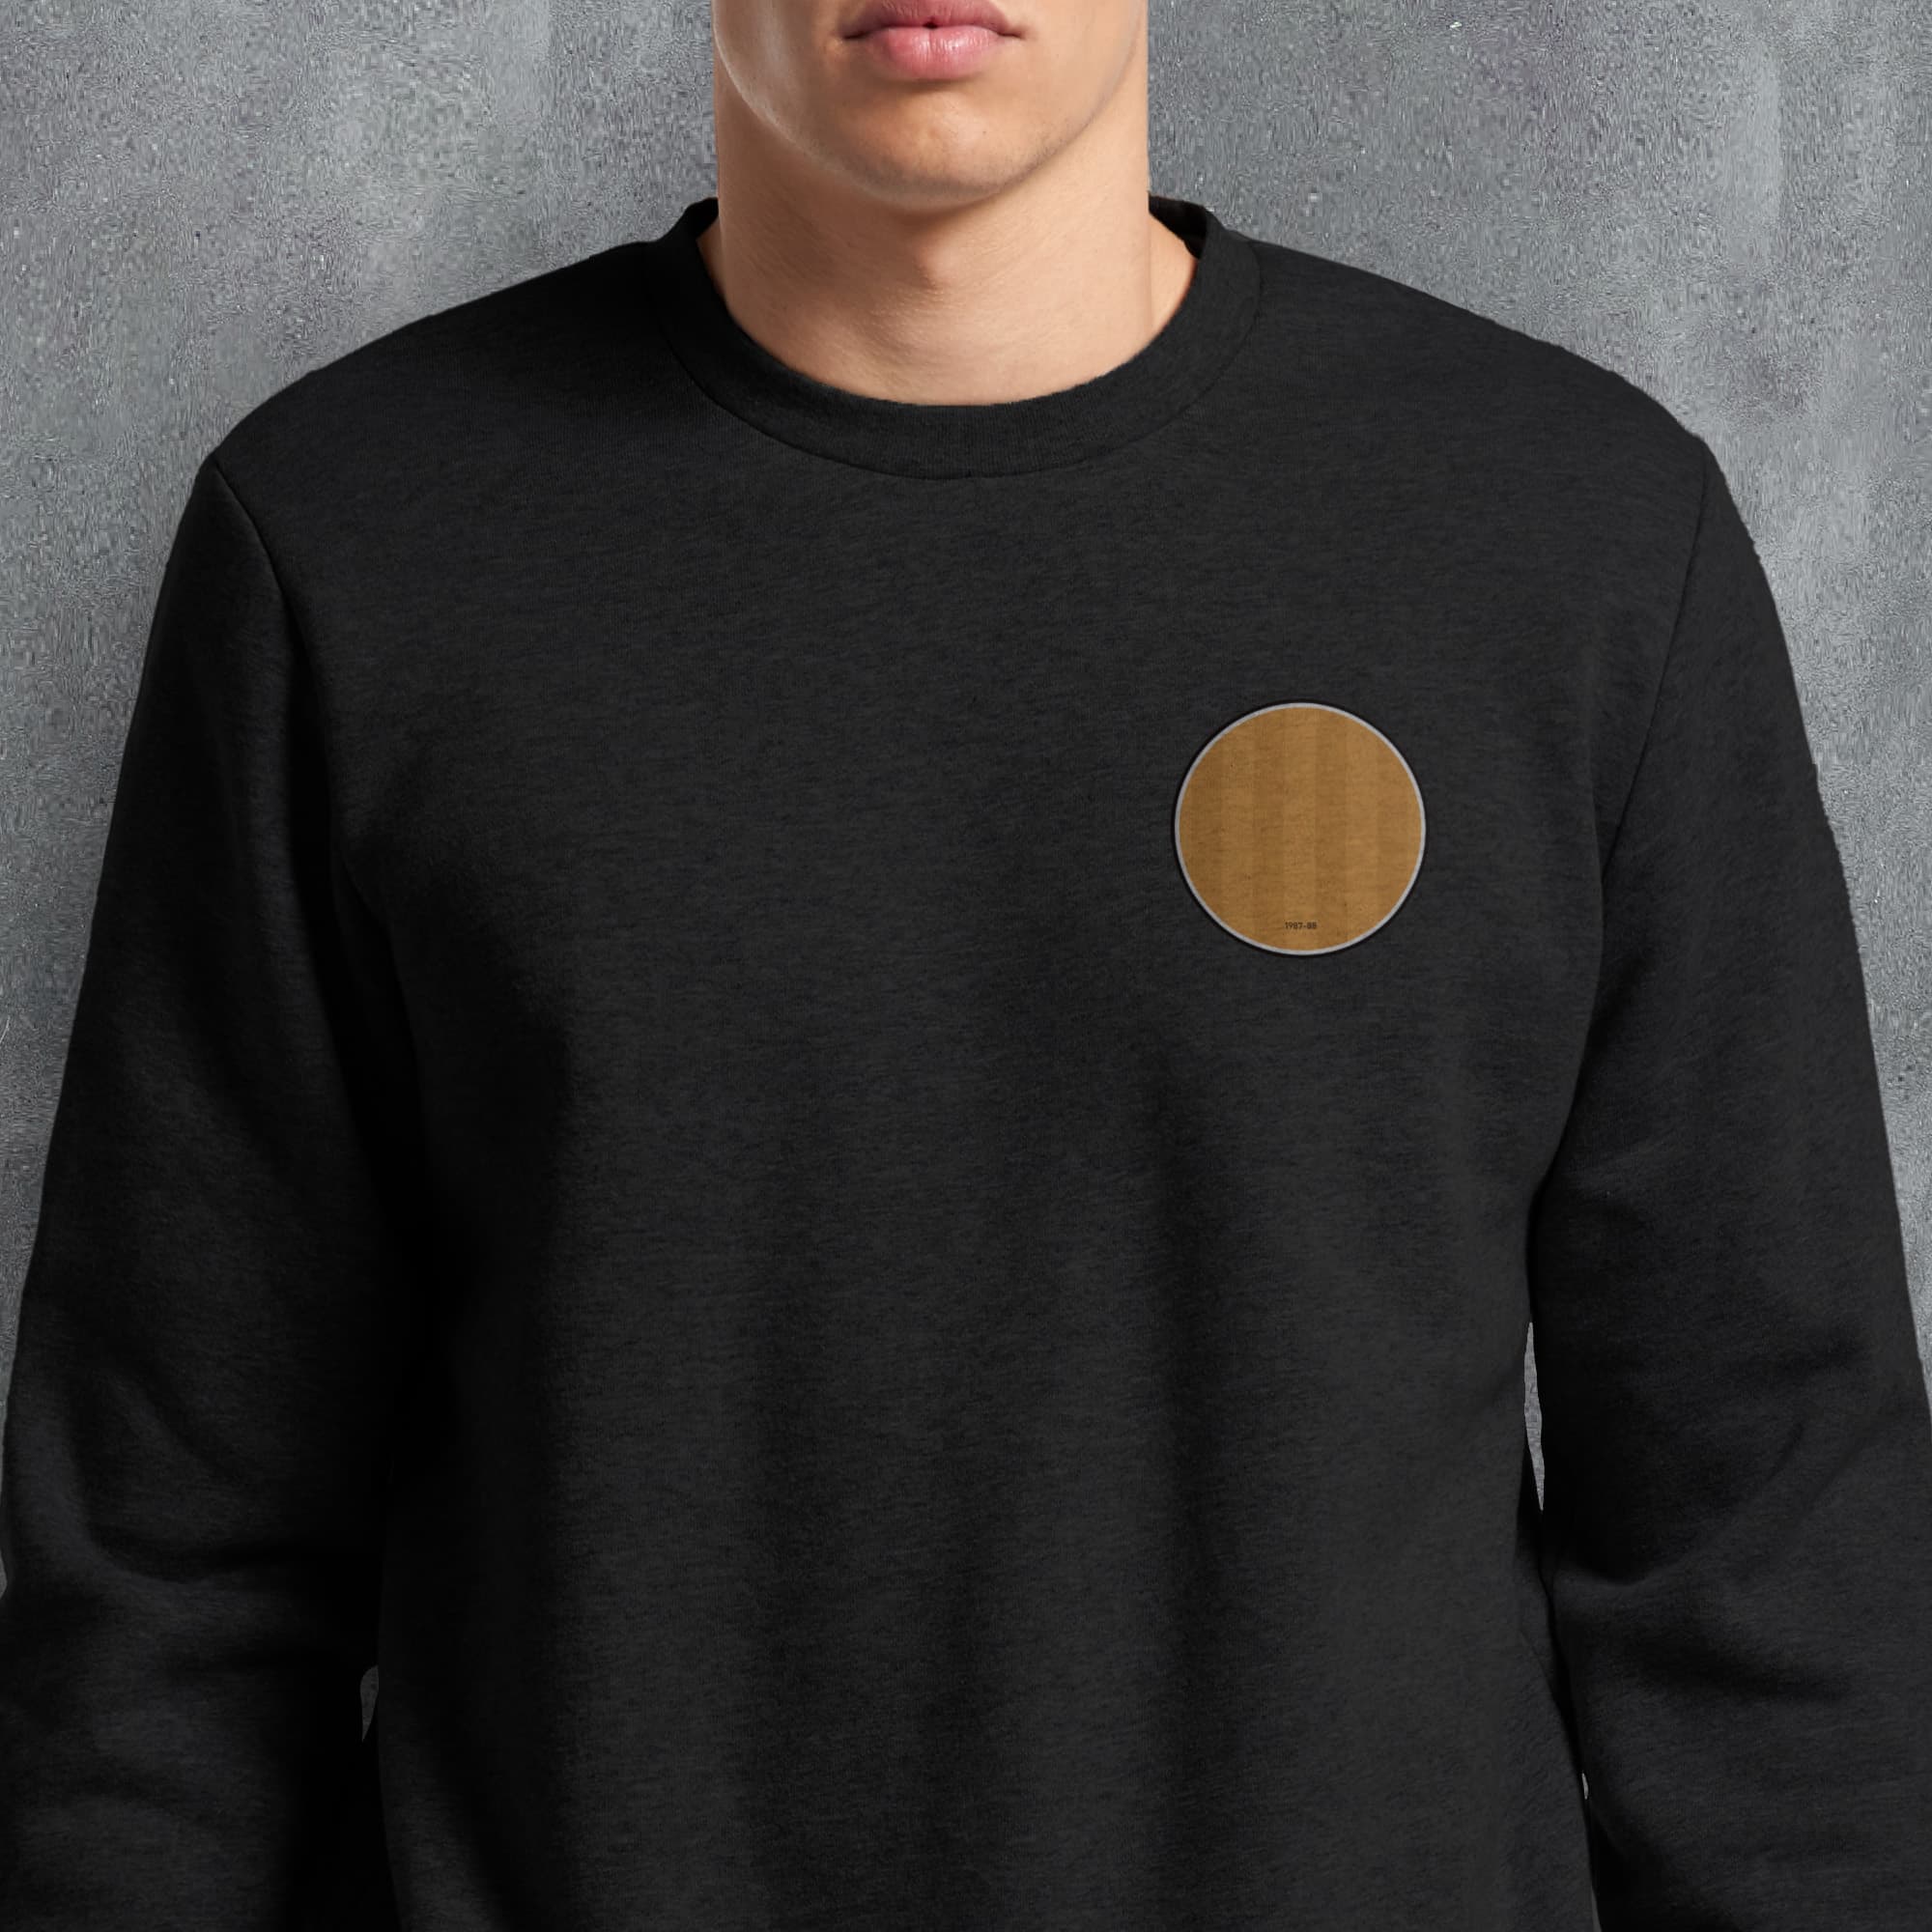 a man wearing a black sweatshirt with a brown circle patch